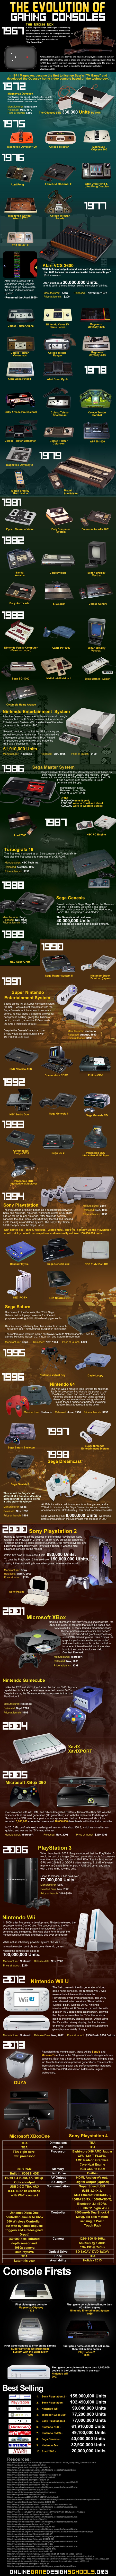 Evolution of Gaming consoles